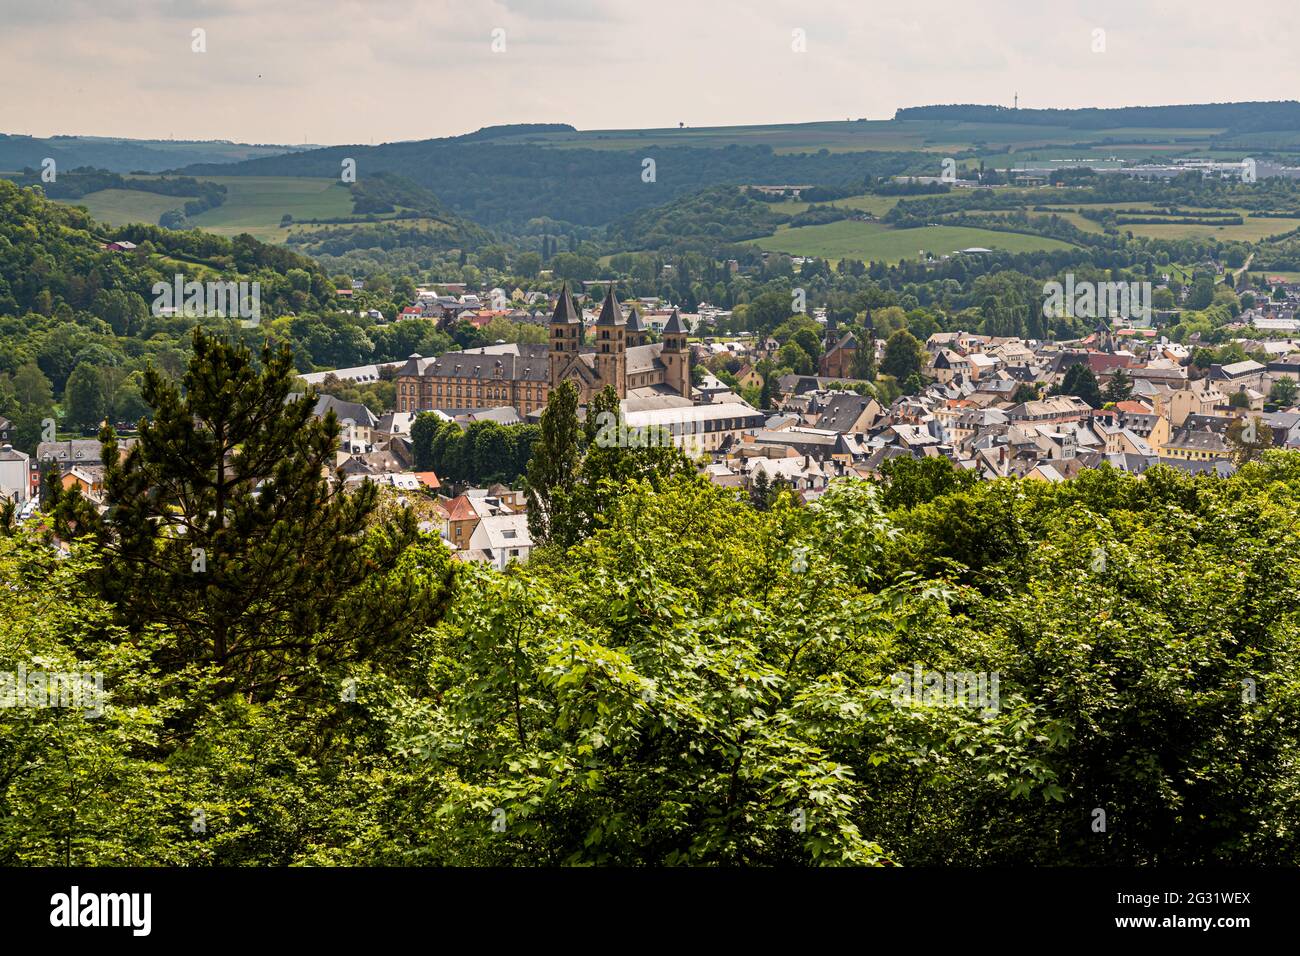 Echternach with the basilica seen from the viewpoint Trooskneppchen. Panorama shot Cityscape of Echternach, Luxembourg Stock Photo